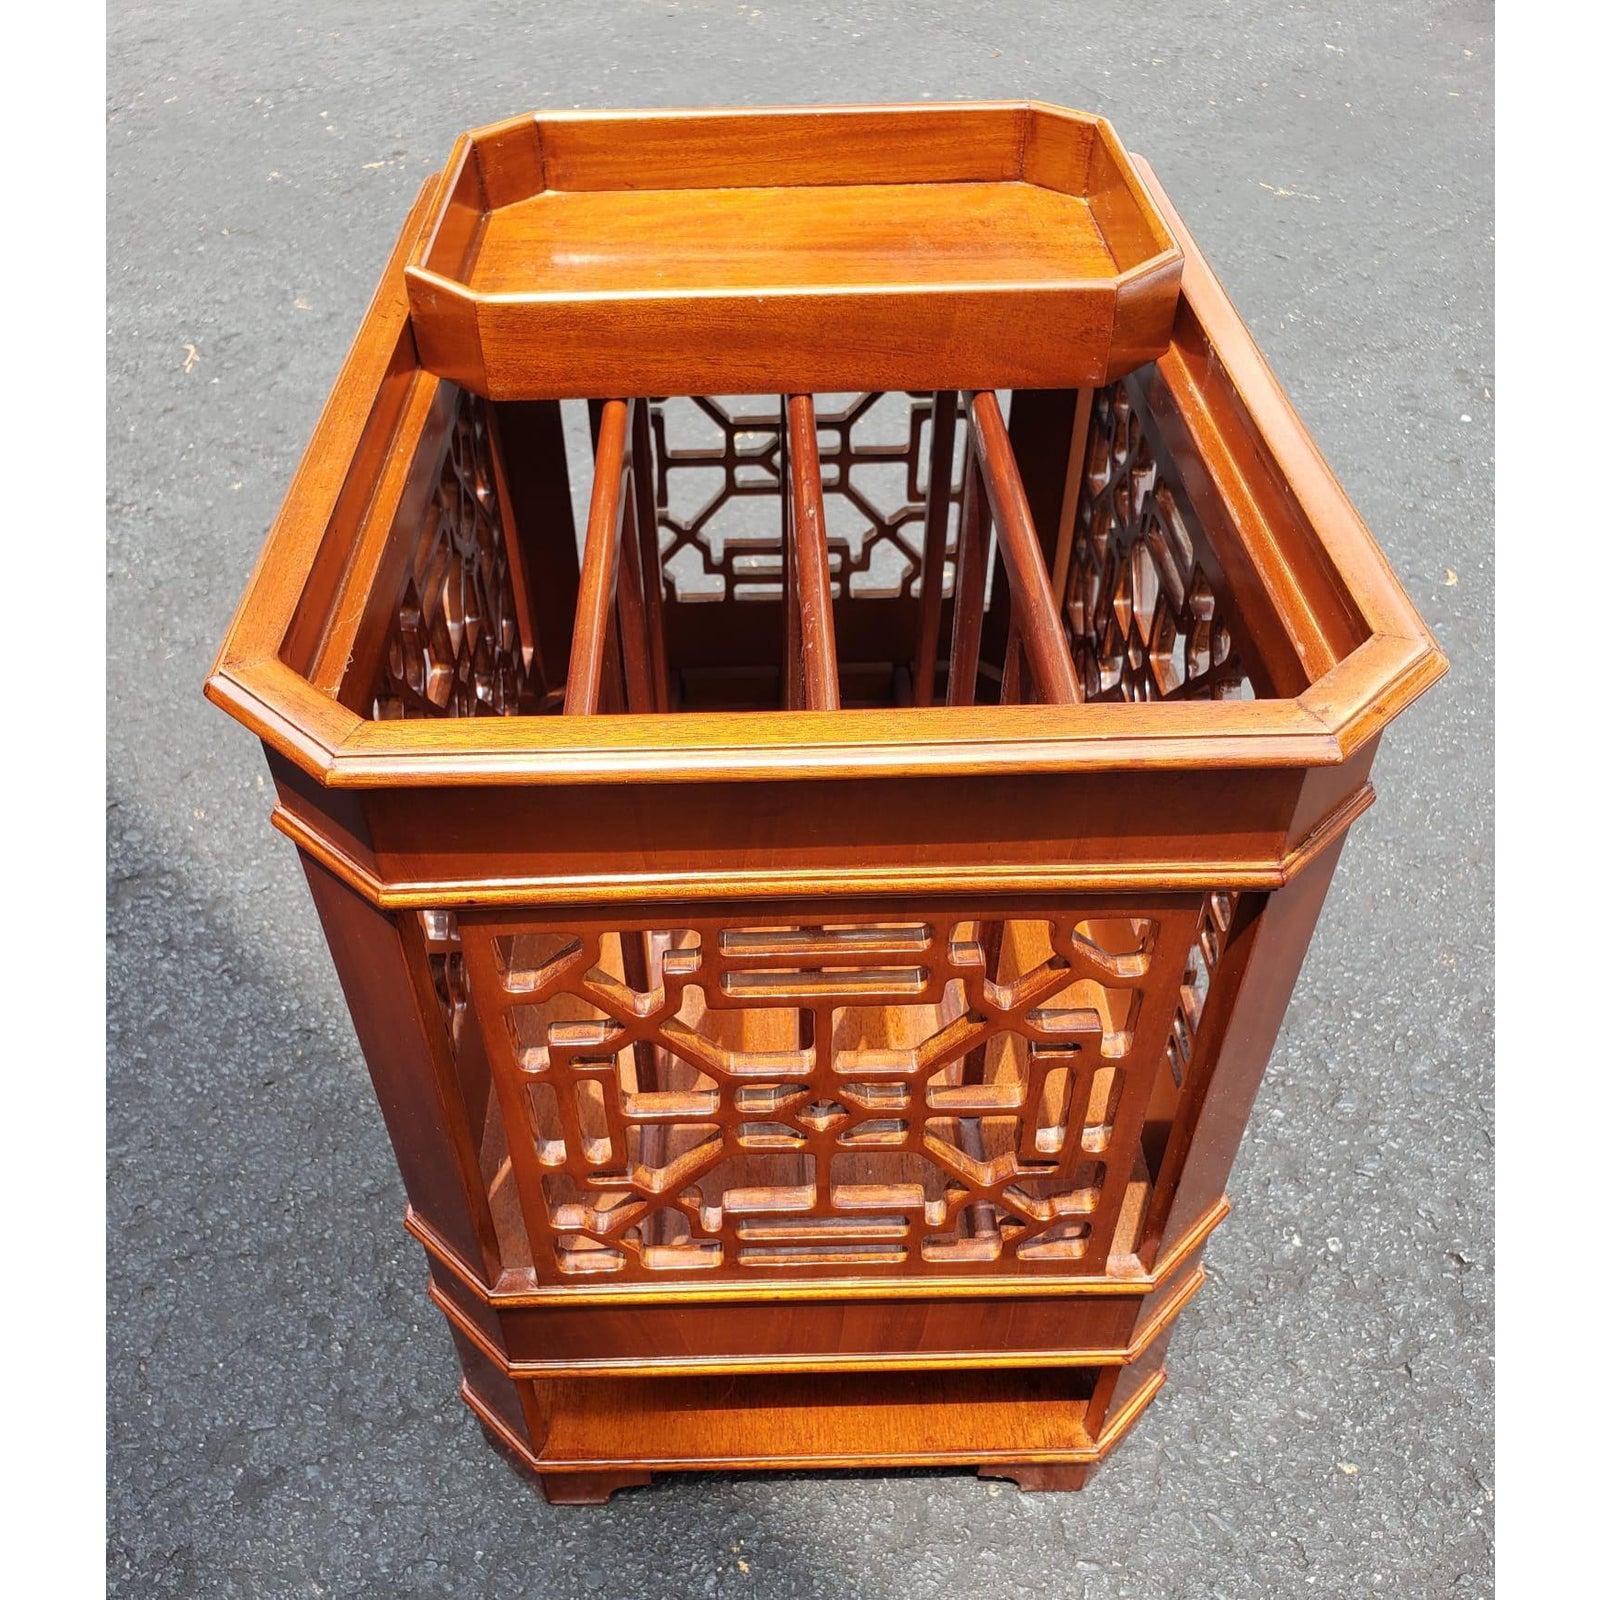 Luxurious Fruitwood Chippendale Magazine Rack with sliding tray. Asian carved accent. 
Measures: 19.5